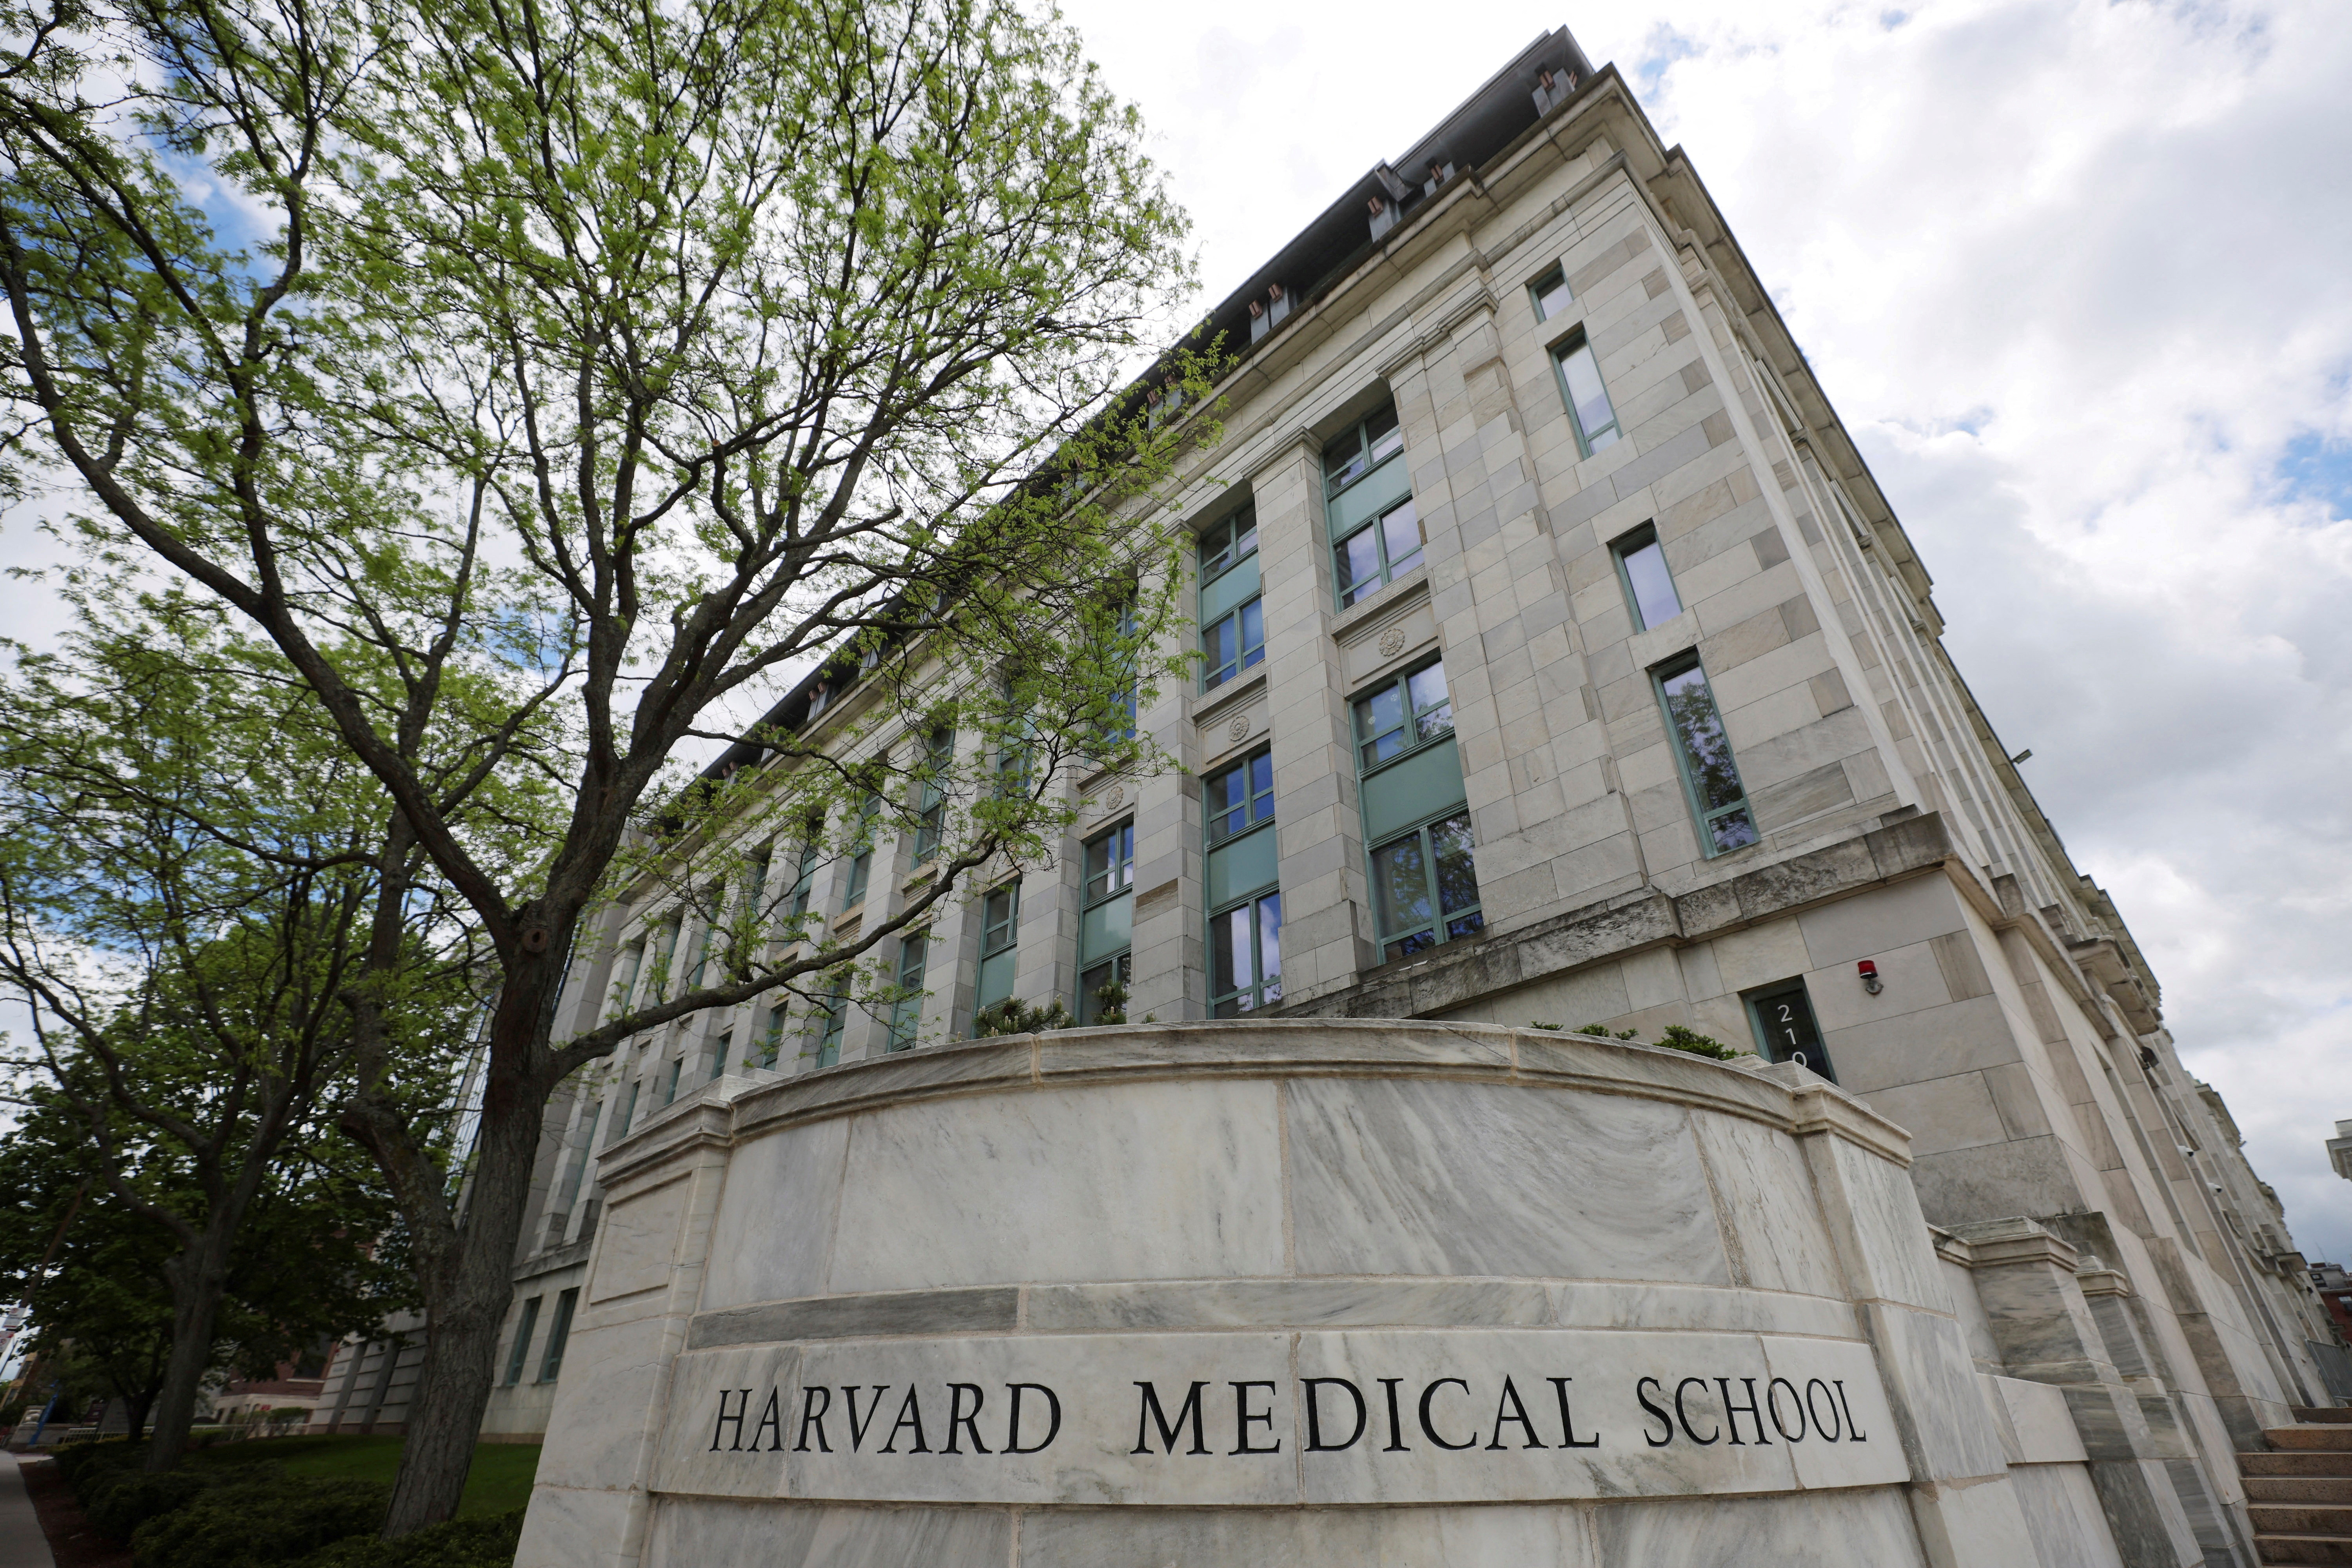 The Harvard Medical School sits in the Longwood Medical Area in Boston